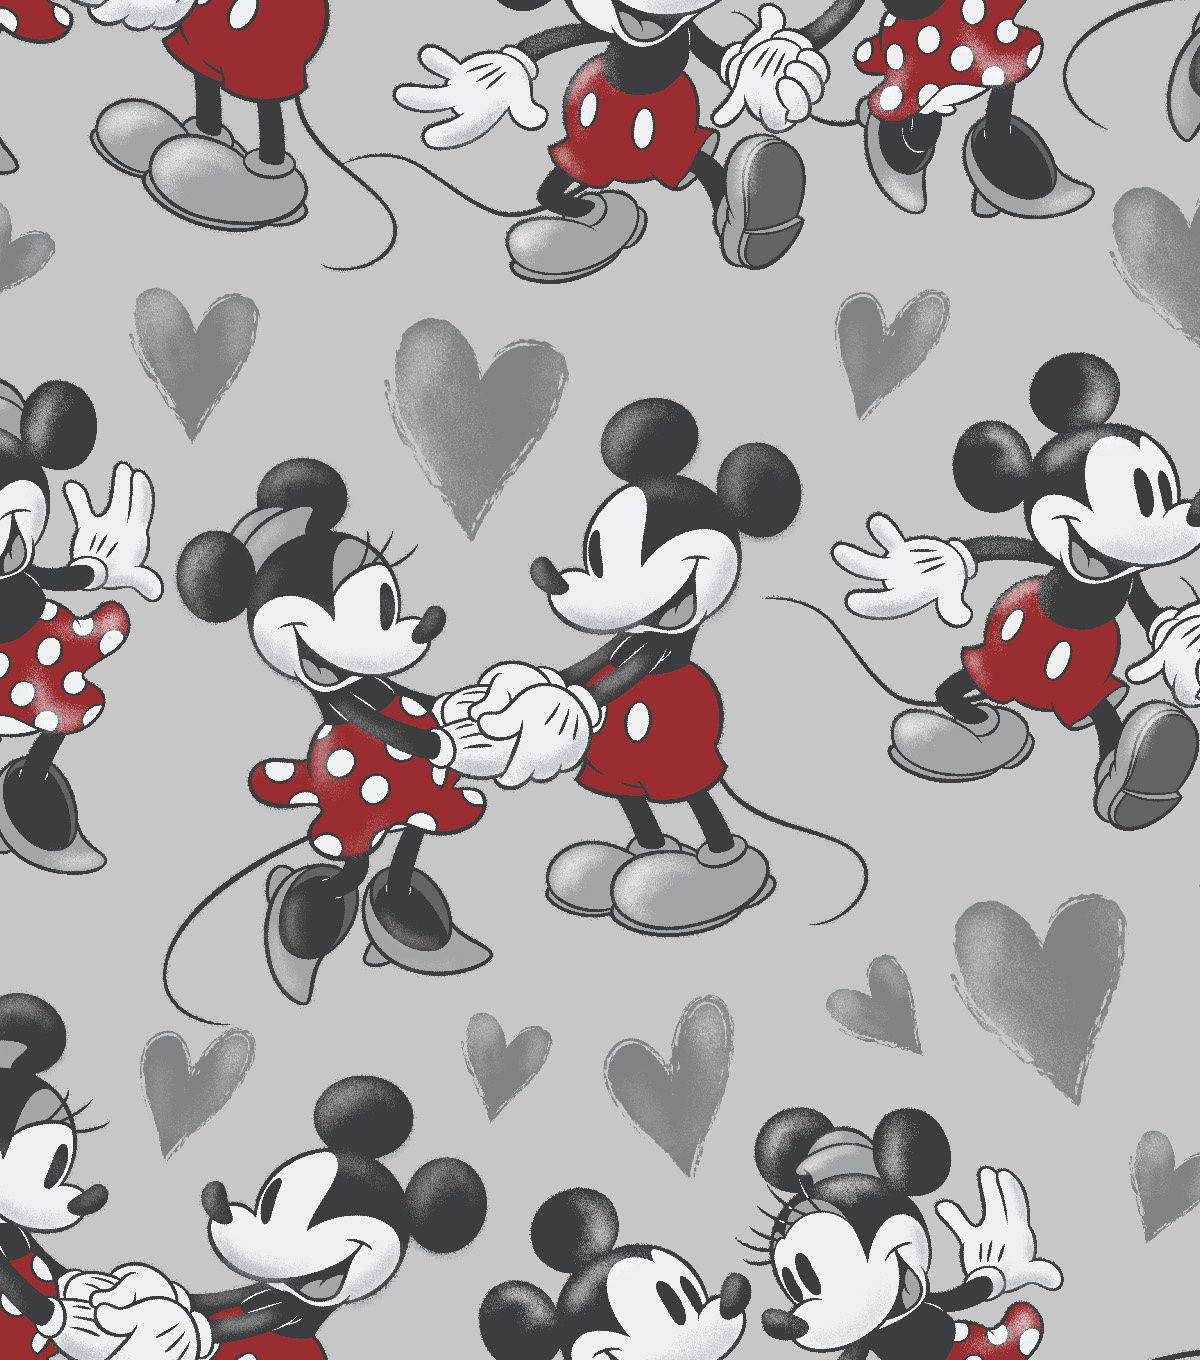 Download Minnie Mouse Wallpaper